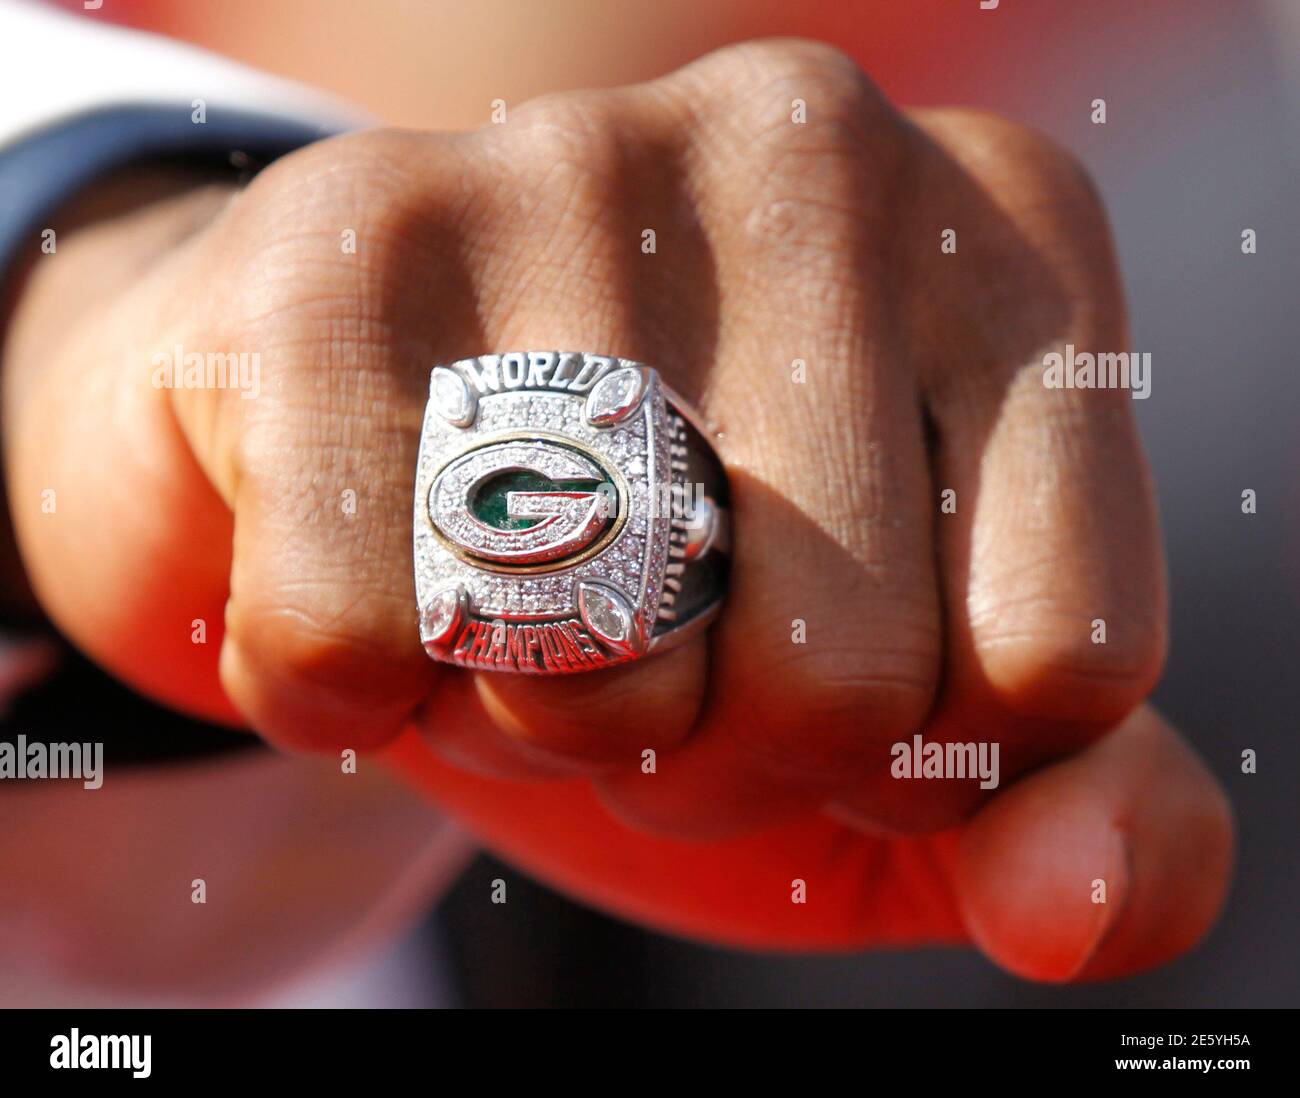 Green Bay Packers NFL football player Jarrett Bush shows off his Super Bowl  ring as he arrives at the 2011 ESPY Awards in Los Angeles, California, July  13, 2011. REUTERS/Danny Moloshok (UNITED